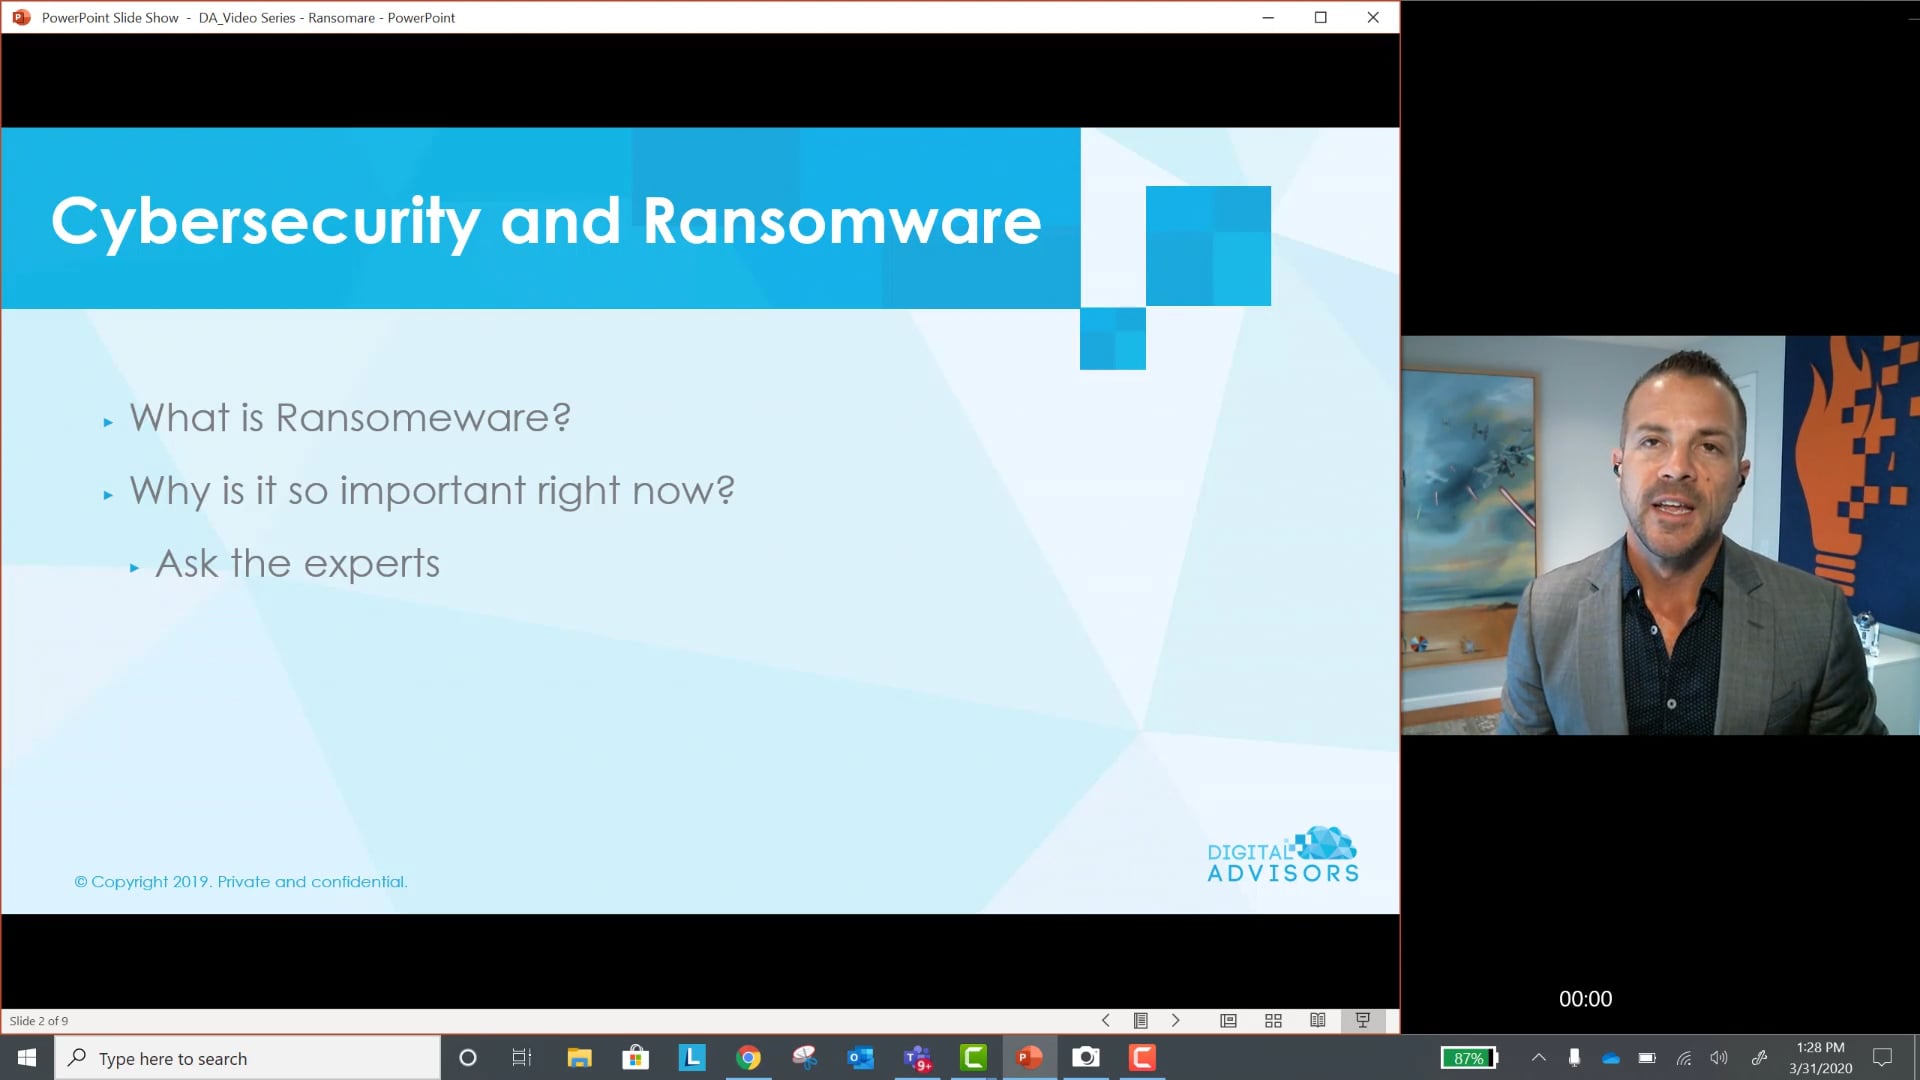 Cybersecurity and Ransomware Part 2